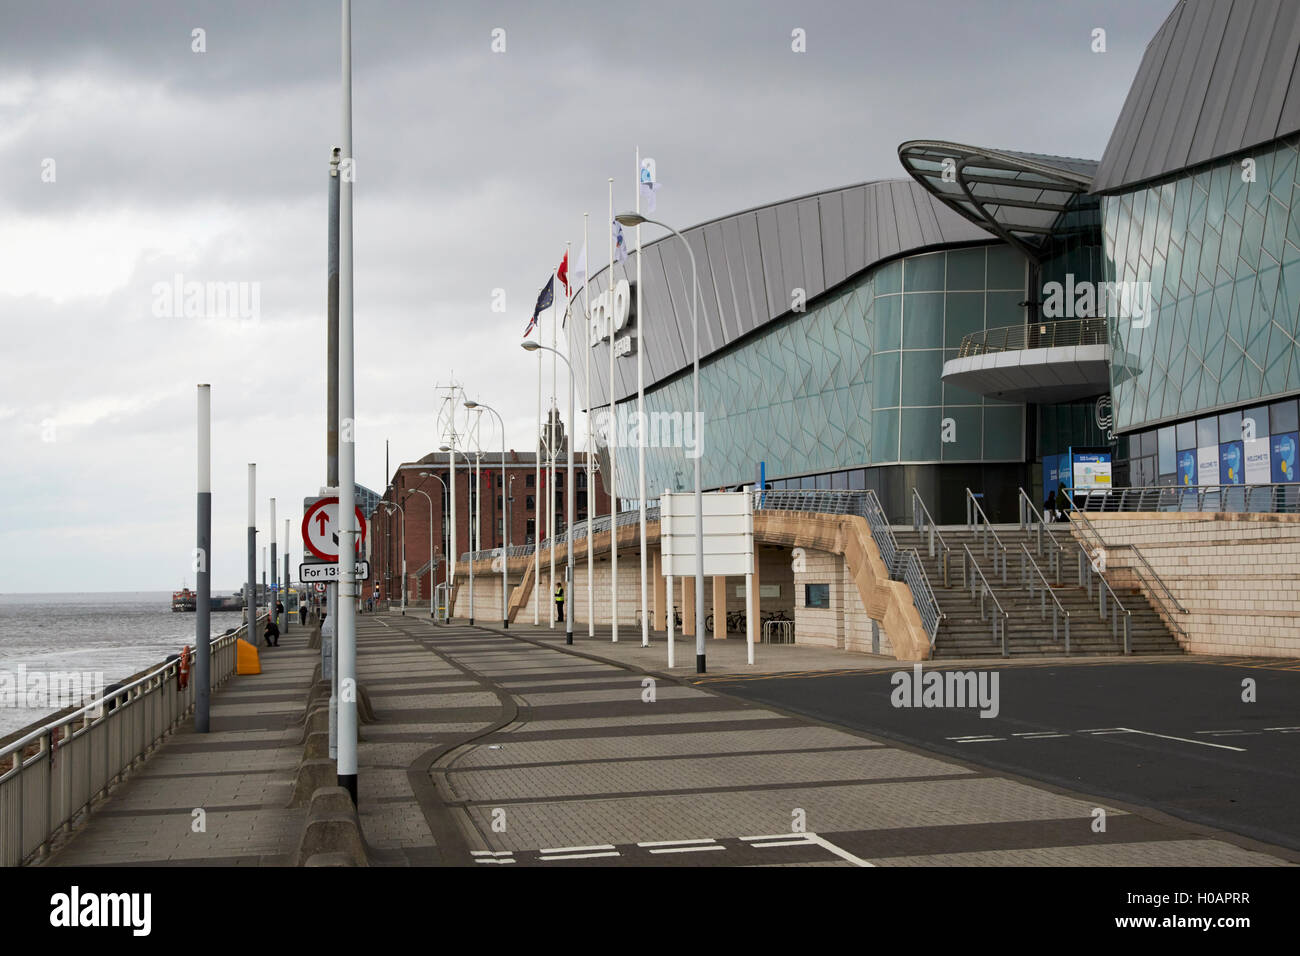 bt convention centre and echo arena Liverpool Merseyside UK Stock Photo